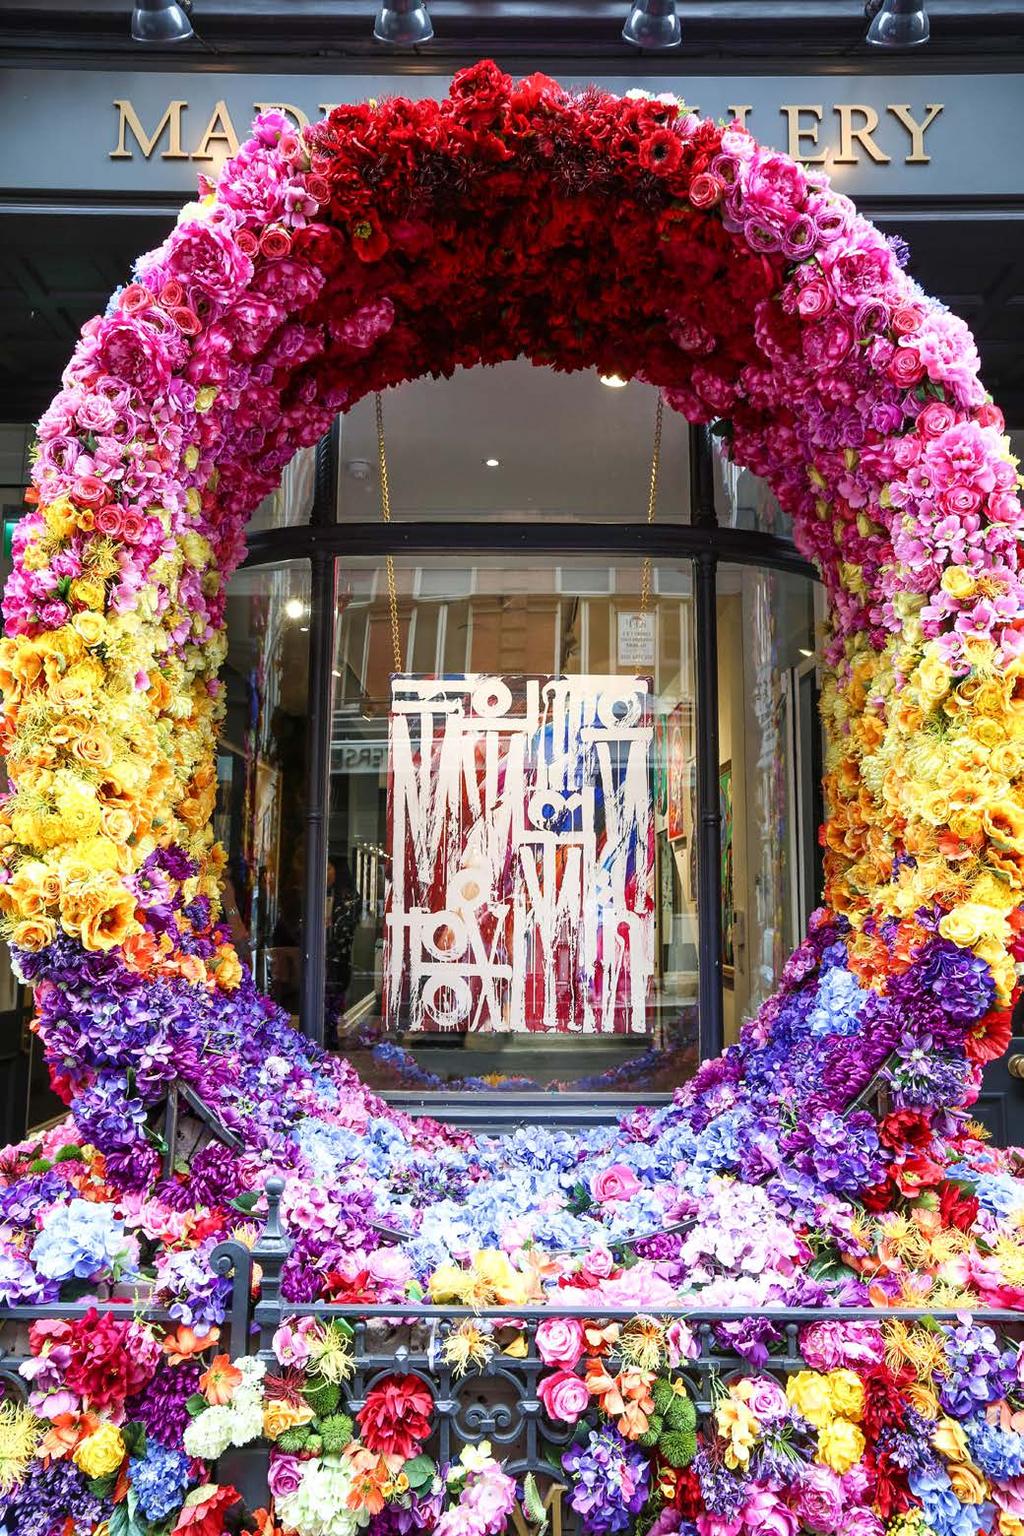 INTRODUCTION THE SUMMER EXHIBITION Maddox Gallery recently hosted ONE LOVE, the highly anticipated first UK solo exhibition by LA-based artist Danny Minnick, with celebrities descending on Mayfair to